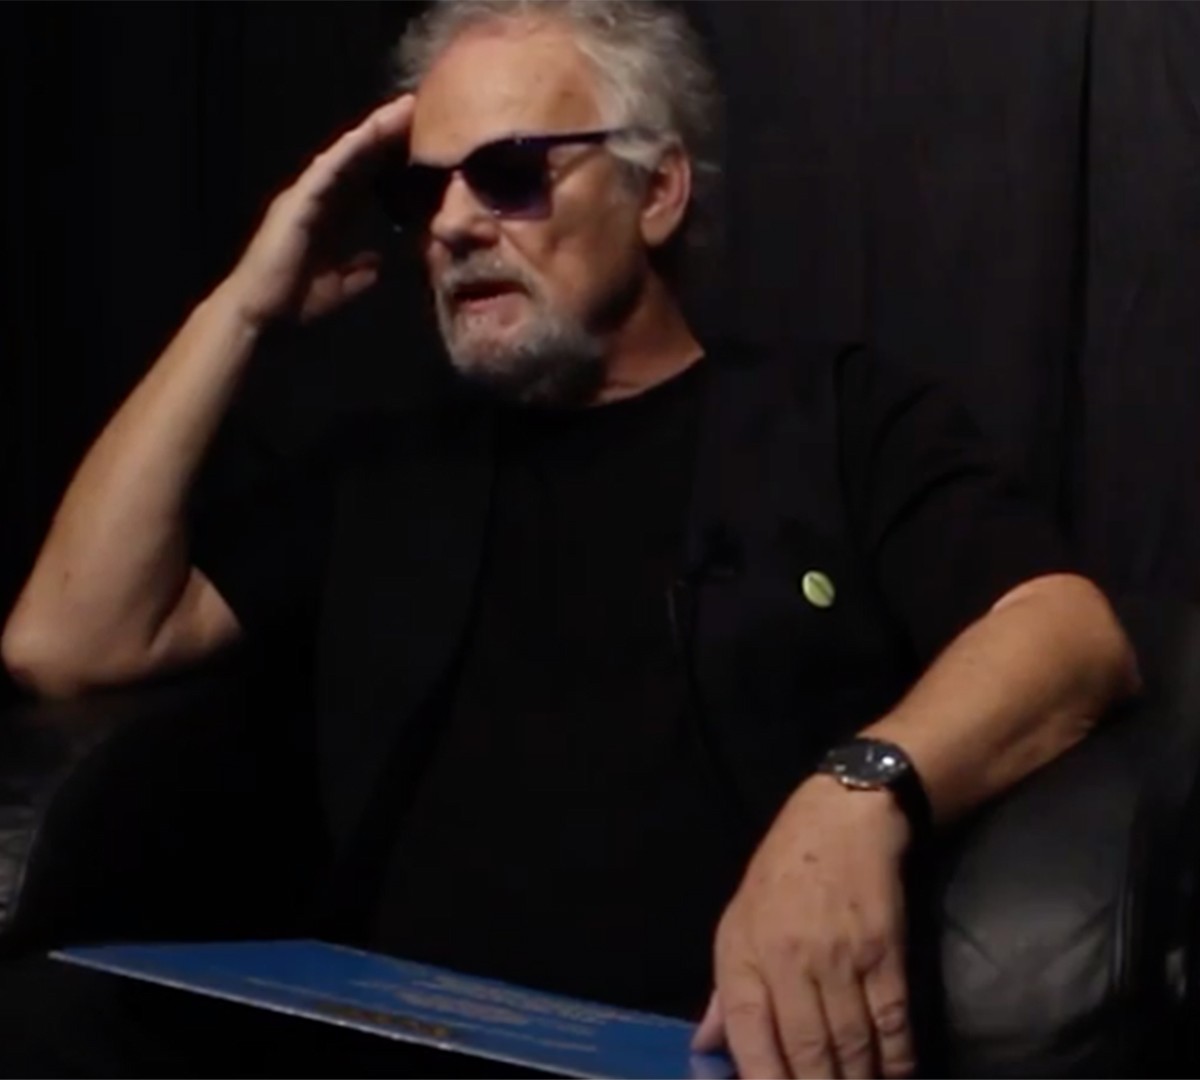 Behind The Vinyl – I Wouldn’t Want To Lose Your Love – Myles Goodwyn from April Wine